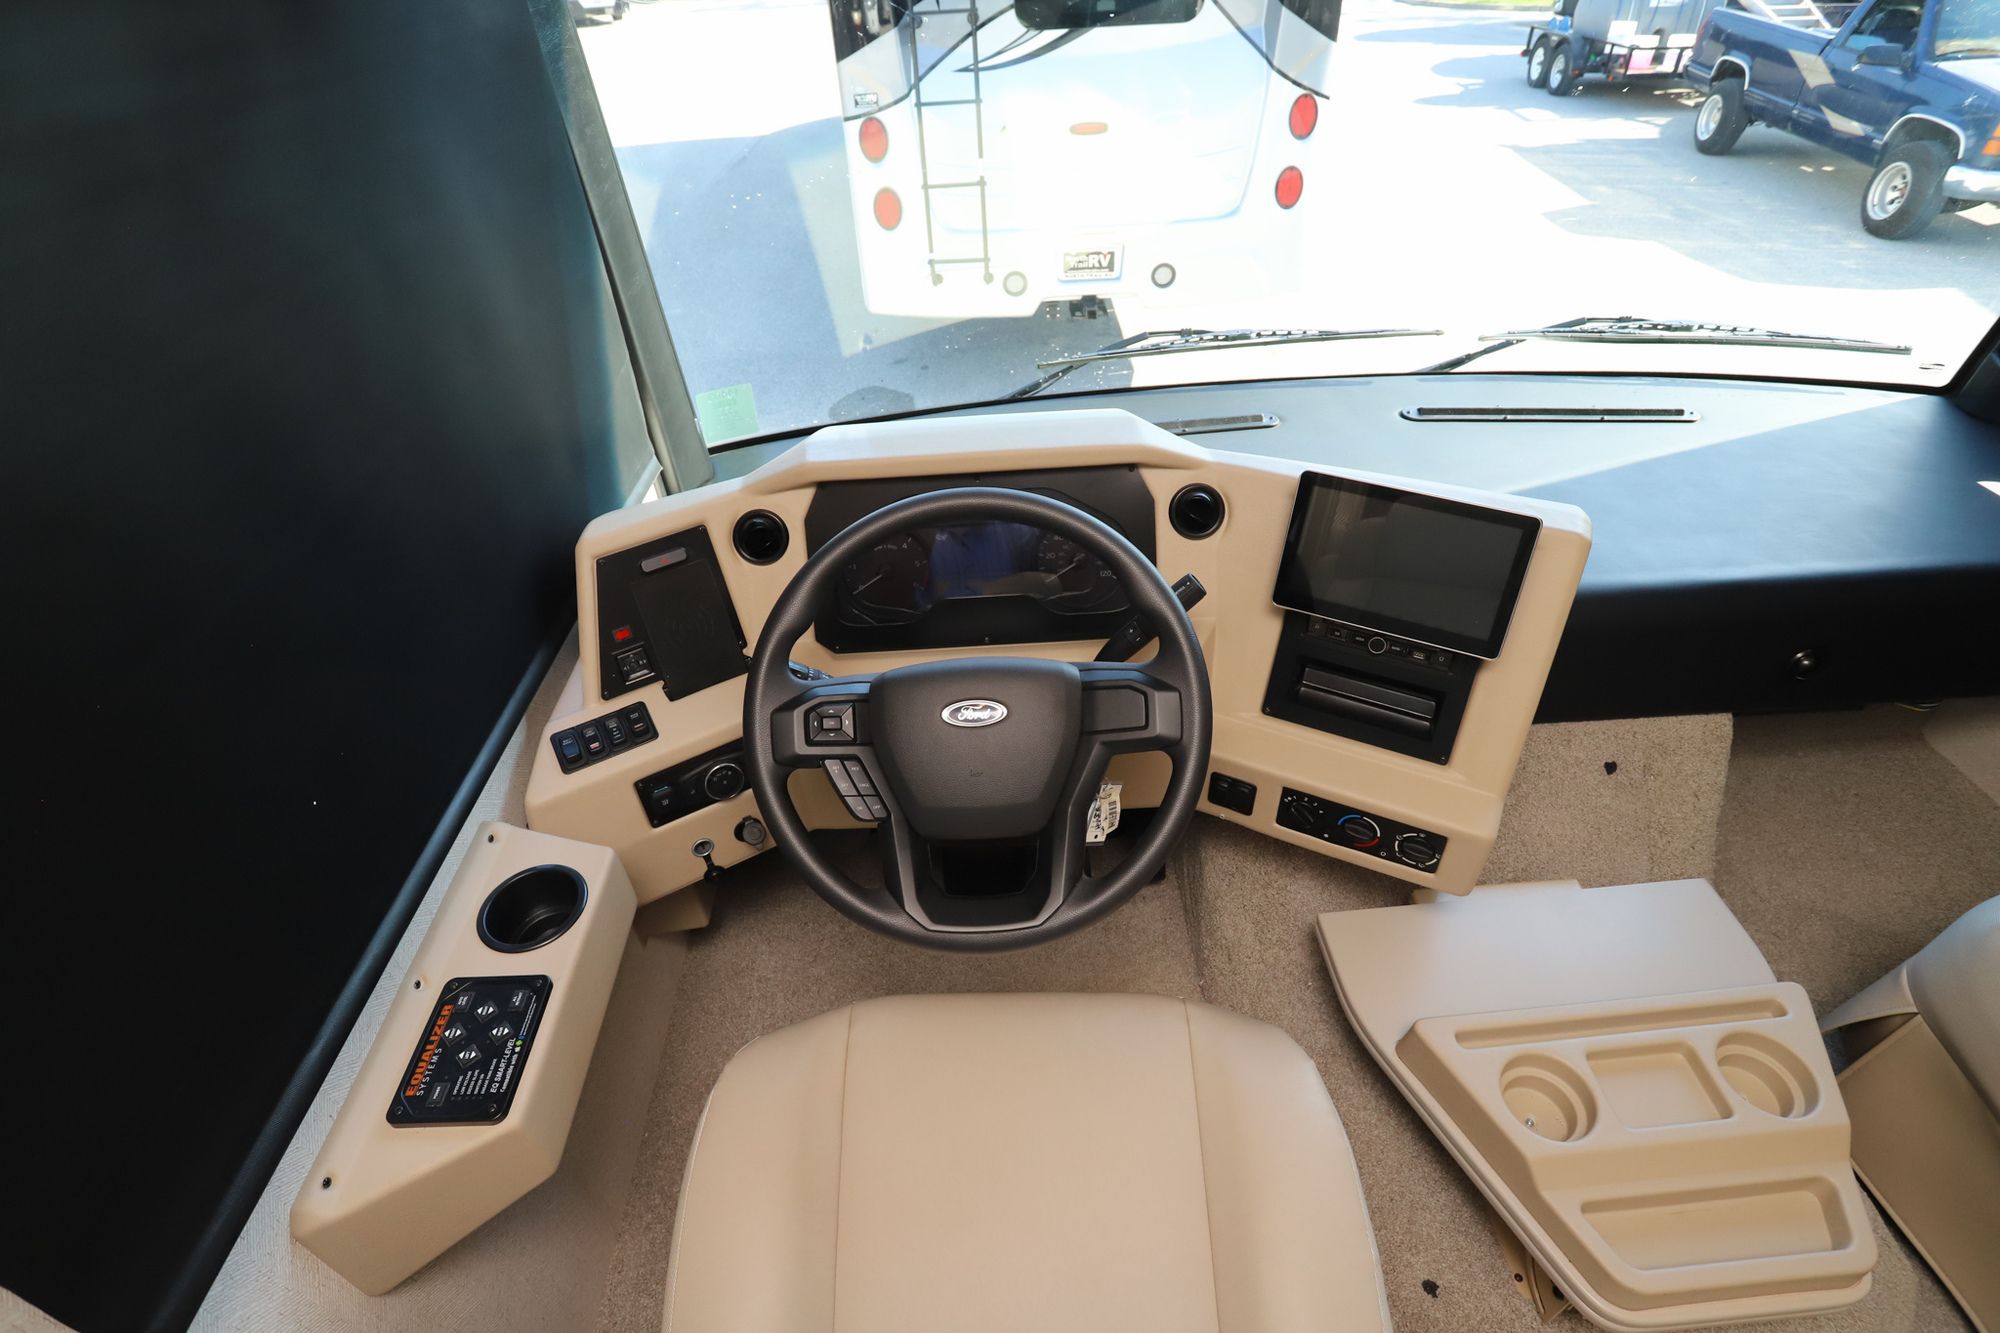 New 2022 Newmar Bay Star Sport 3014 Class A  For Sale